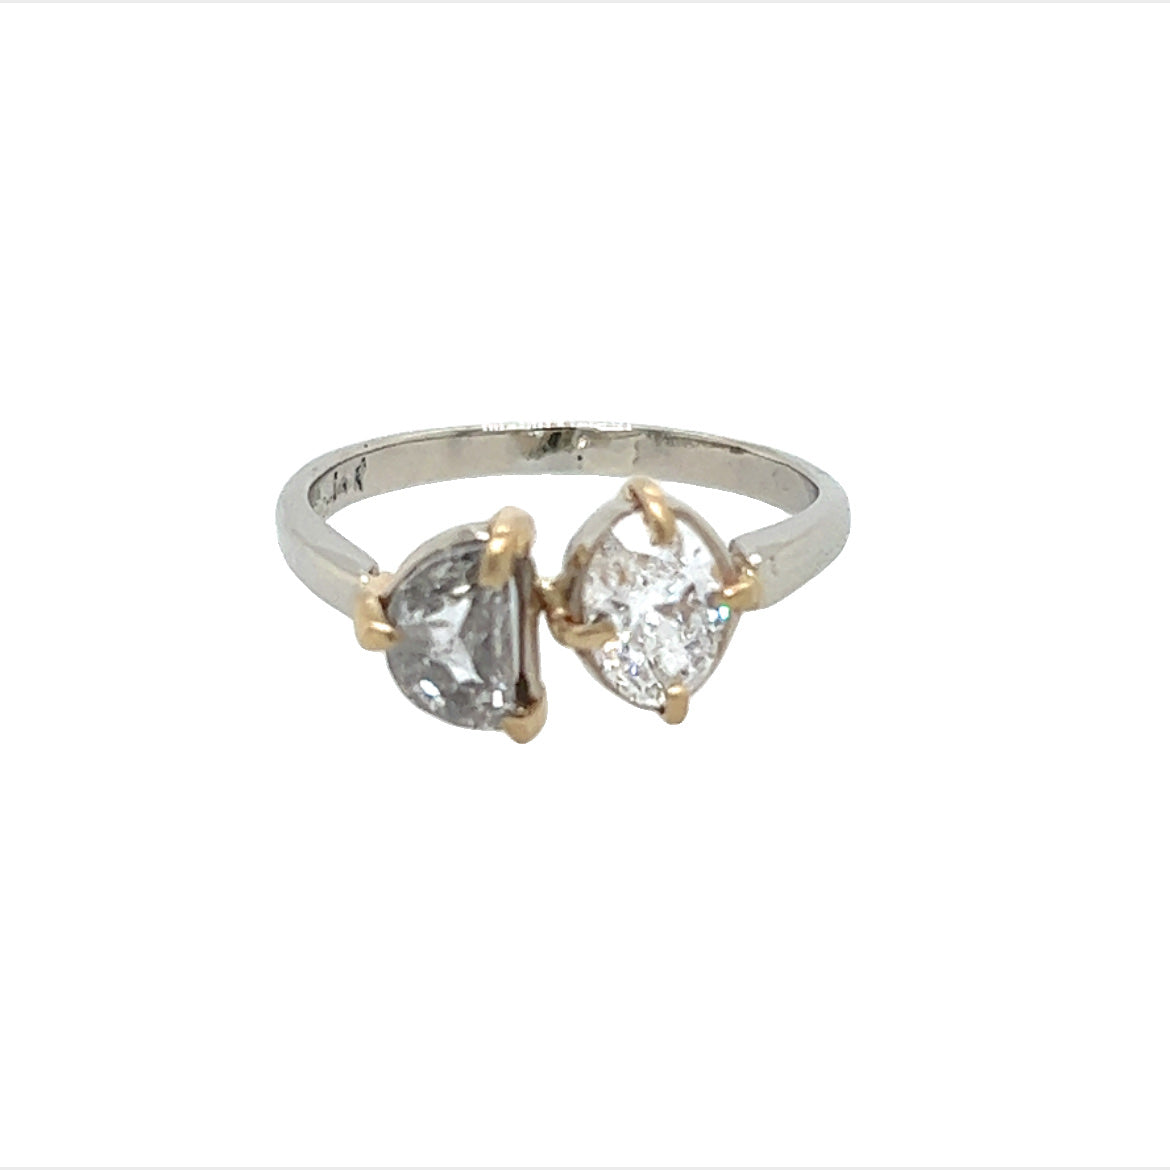 The Night and Day- Salt & Pepper Diamond, Lab grown diamond, 14k yellow and white gold